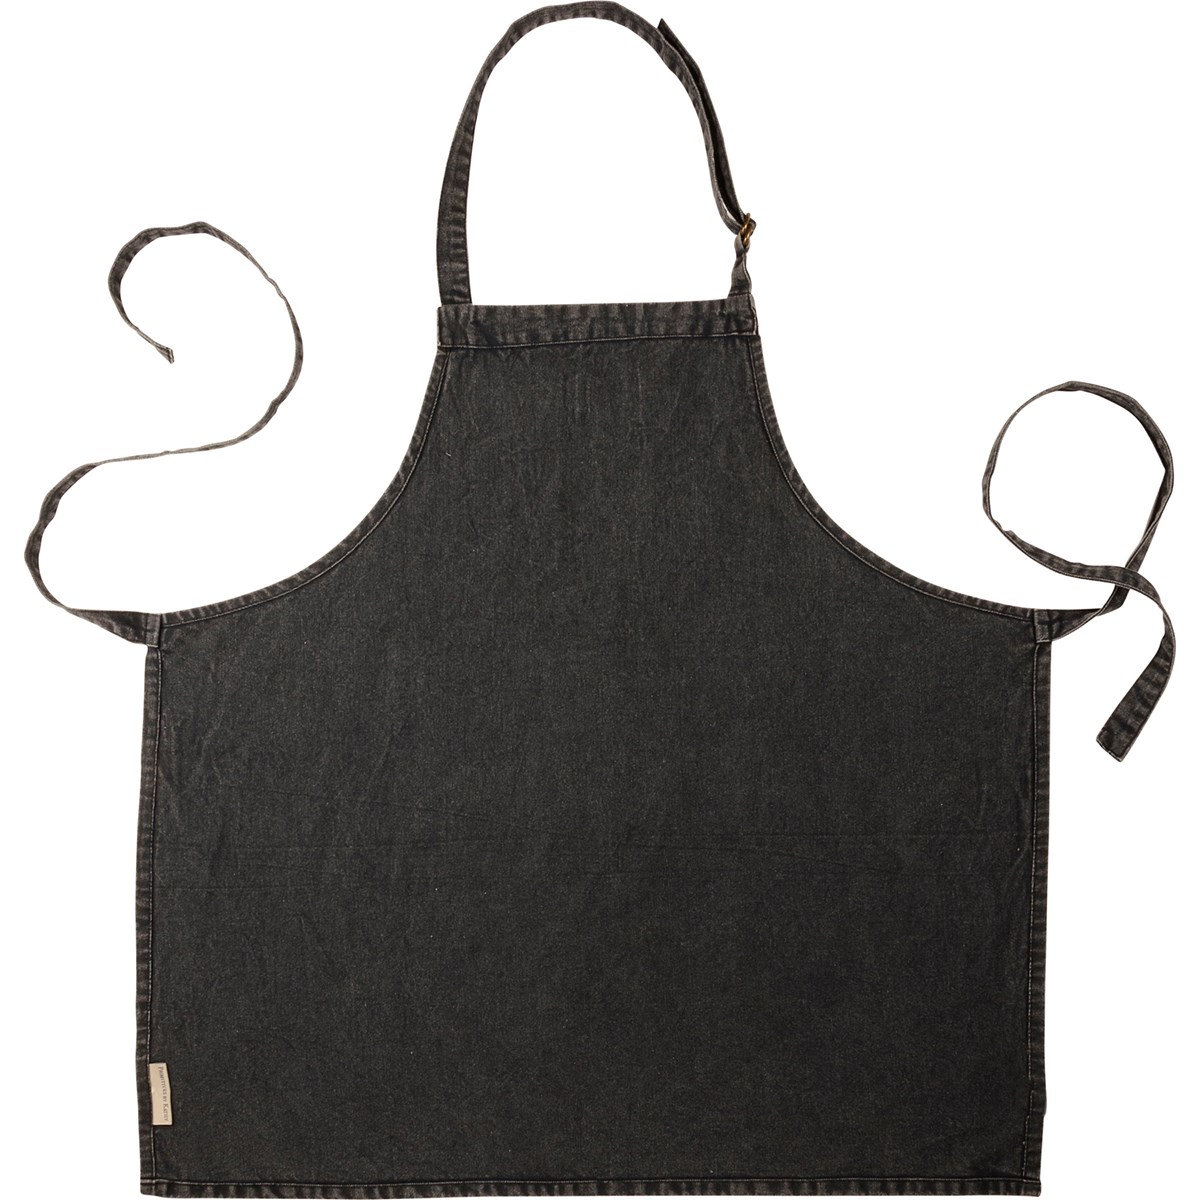 Cooking Is Love Made Visible Apron - Cotton, Metal